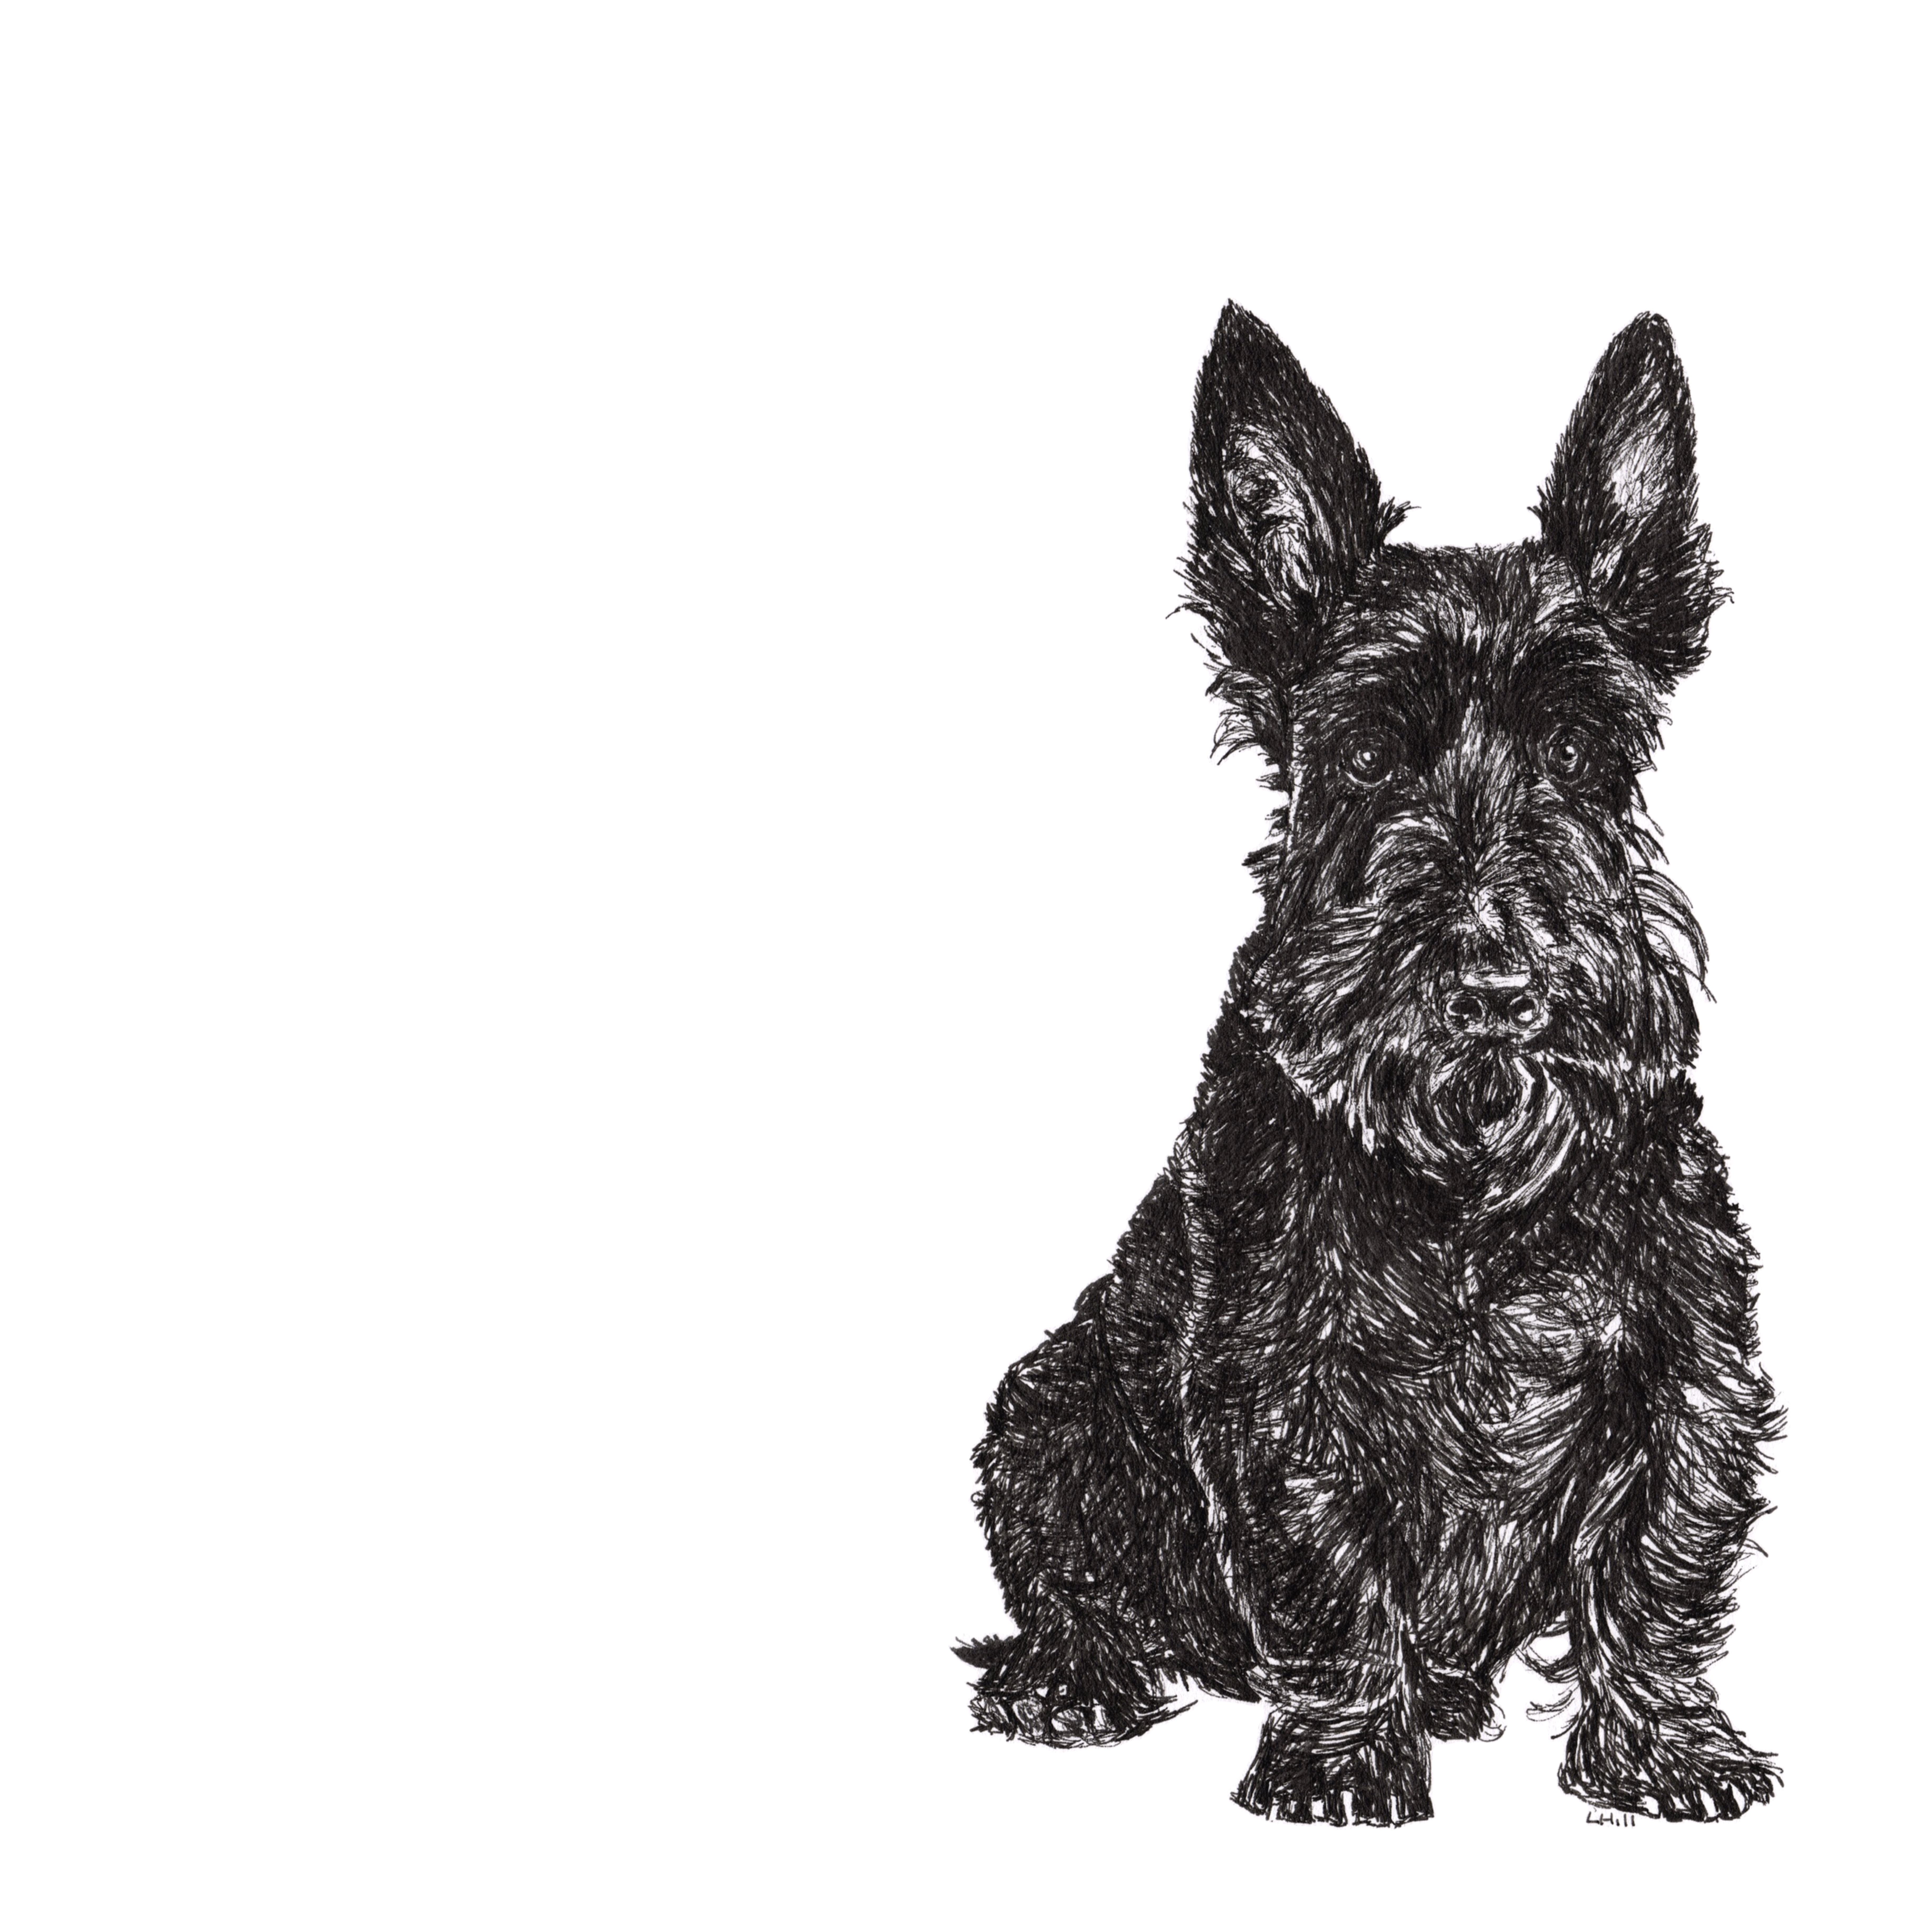 Scottish Terrier pen and ink illustration by Louisa Hill